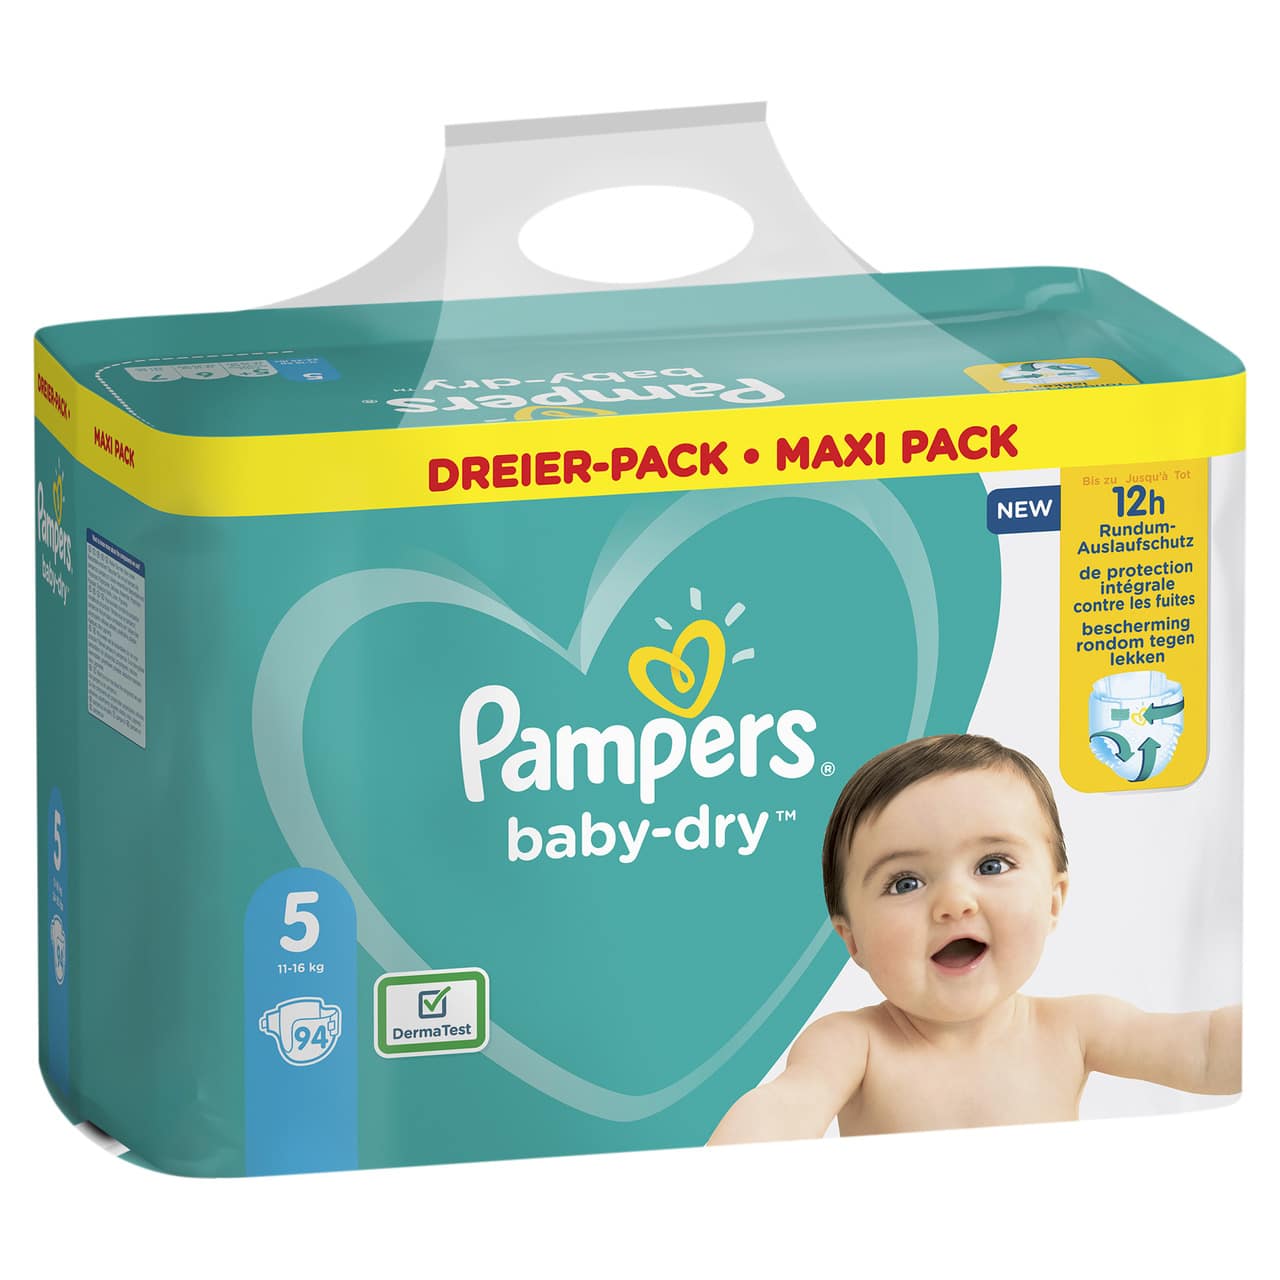 PAMPERS MAXI PACK BABYDRY SIZE 5 (By 94 nappies) (NEW)